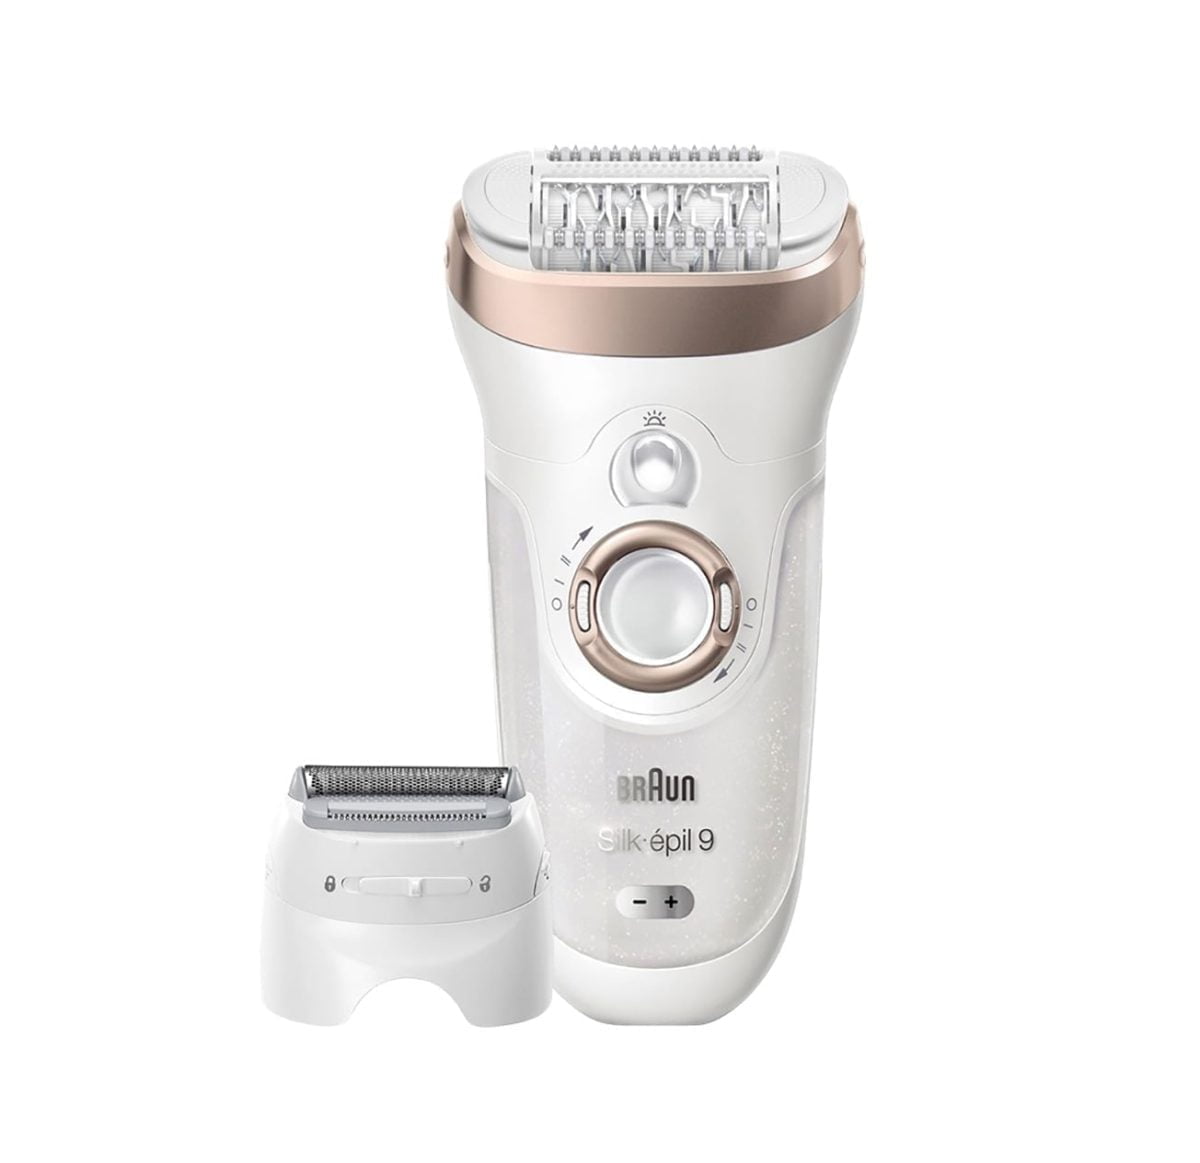 Tns Se 9561 Braun Silk Epil 9 9 561 Wet Dry Cordless Epilator Gold 15623399170 Braun &Amp;Lt;H1&Amp;Gt;Braun Silk-Épil 9 9-561 Wet &Amp;Amp; Dry Cordless Epilator/Epilation + 6 Extras&Amp;Lt;/H1&Amp;Gt; Https://Www.youtube.com/Watch?V=Mdrhywfkply &Amp;Lt;Ul Class=&Amp;Quot;A-Unordered-List A-Vertical A-Spacing-Mini&Amp;Quot;&Amp;Gt; &Amp;Lt;Li&Amp;Gt;&Amp;Lt;Span Class=&Amp;Quot;A-List-Item&Amp;Quot;&Amp;Gt; Epilator Removes More Hair In One Stroke* &Amp;Lt;/Span&Amp;Gt;&Amp;Lt;/Li&Amp;Gt; &Amp;Lt;Li&Amp;Gt;&Amp;Lt;Span Class=&Amp;Quot;A-List-Item&Amp;Quot;&Amp;Gt; Epilation Removes Hair 4X Shorter Than Wax &Amp;Lt;/Span&Amp;Gt;&Amp;Lt;/Li&Amp;Gt; &Amp;Lt;Li&Amp;Gt;&Amp;Lt;Span Class=&Amp;Quot;A-List-Item&Amp;Quot;&Amp;Gt; Wet &Amp;Amp; Dry Epilation - Virtually Painless With Regular Use &Amp;Lt;/Span&Amp;Gt;&Amp;Lt;/Li&Amp;Gt; &Amp;Lt;Li&Amp;Gt;&Amp;Lt;Span Class=&Amp;Quot;A-List-Item&Amp;Quot;&Amp;Gt; 6 Extras, Including Shaver Head And Trimmer Cap &Amp;Lt;/Span&Amp;Gt;&Amp;Lt;/Li&Amp;Gt; &Amp;Lt;/Ul&Amp;Gt; Hair Removal Braun Silk-Épil 9 9-561 Wet &Amp;Amp; Dry Cordless Epilator/Epilation + 6 Extras